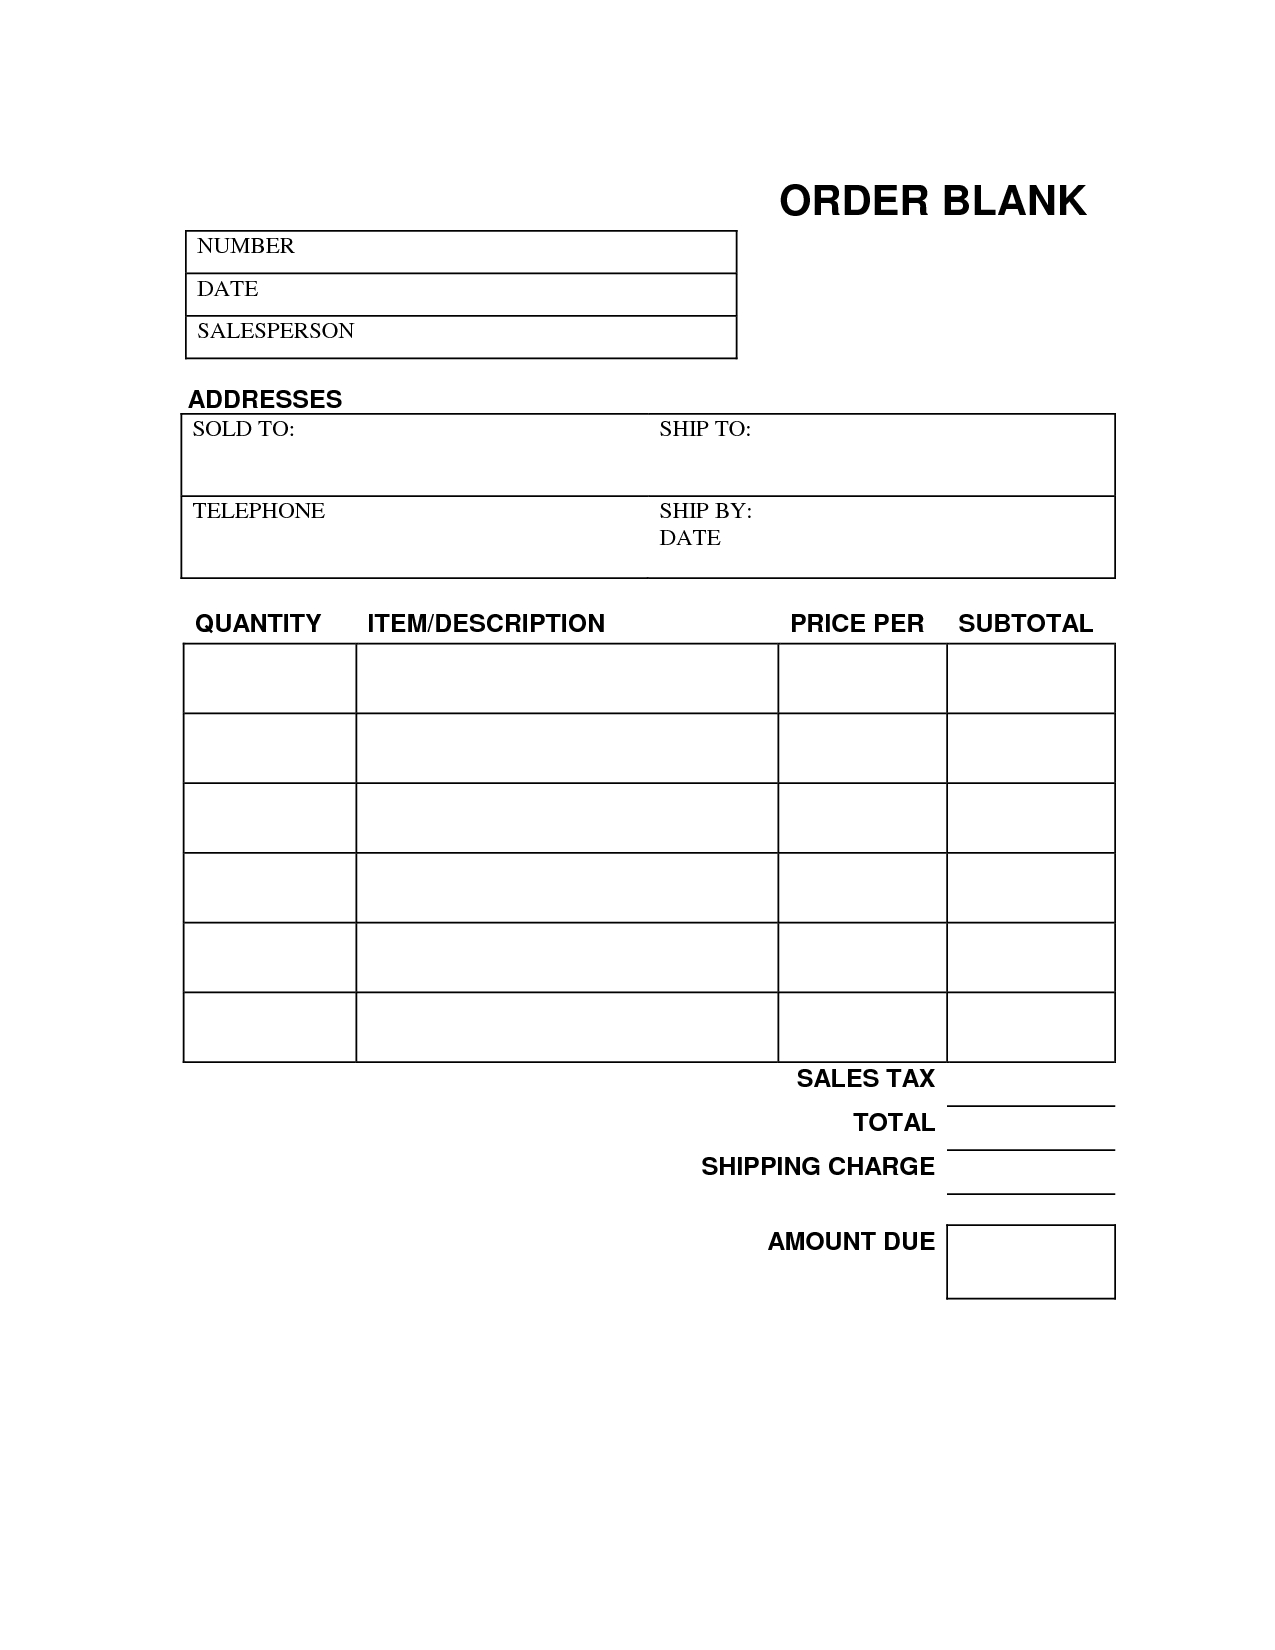 Blank Work Order Form Charlotte Clergy Coalition